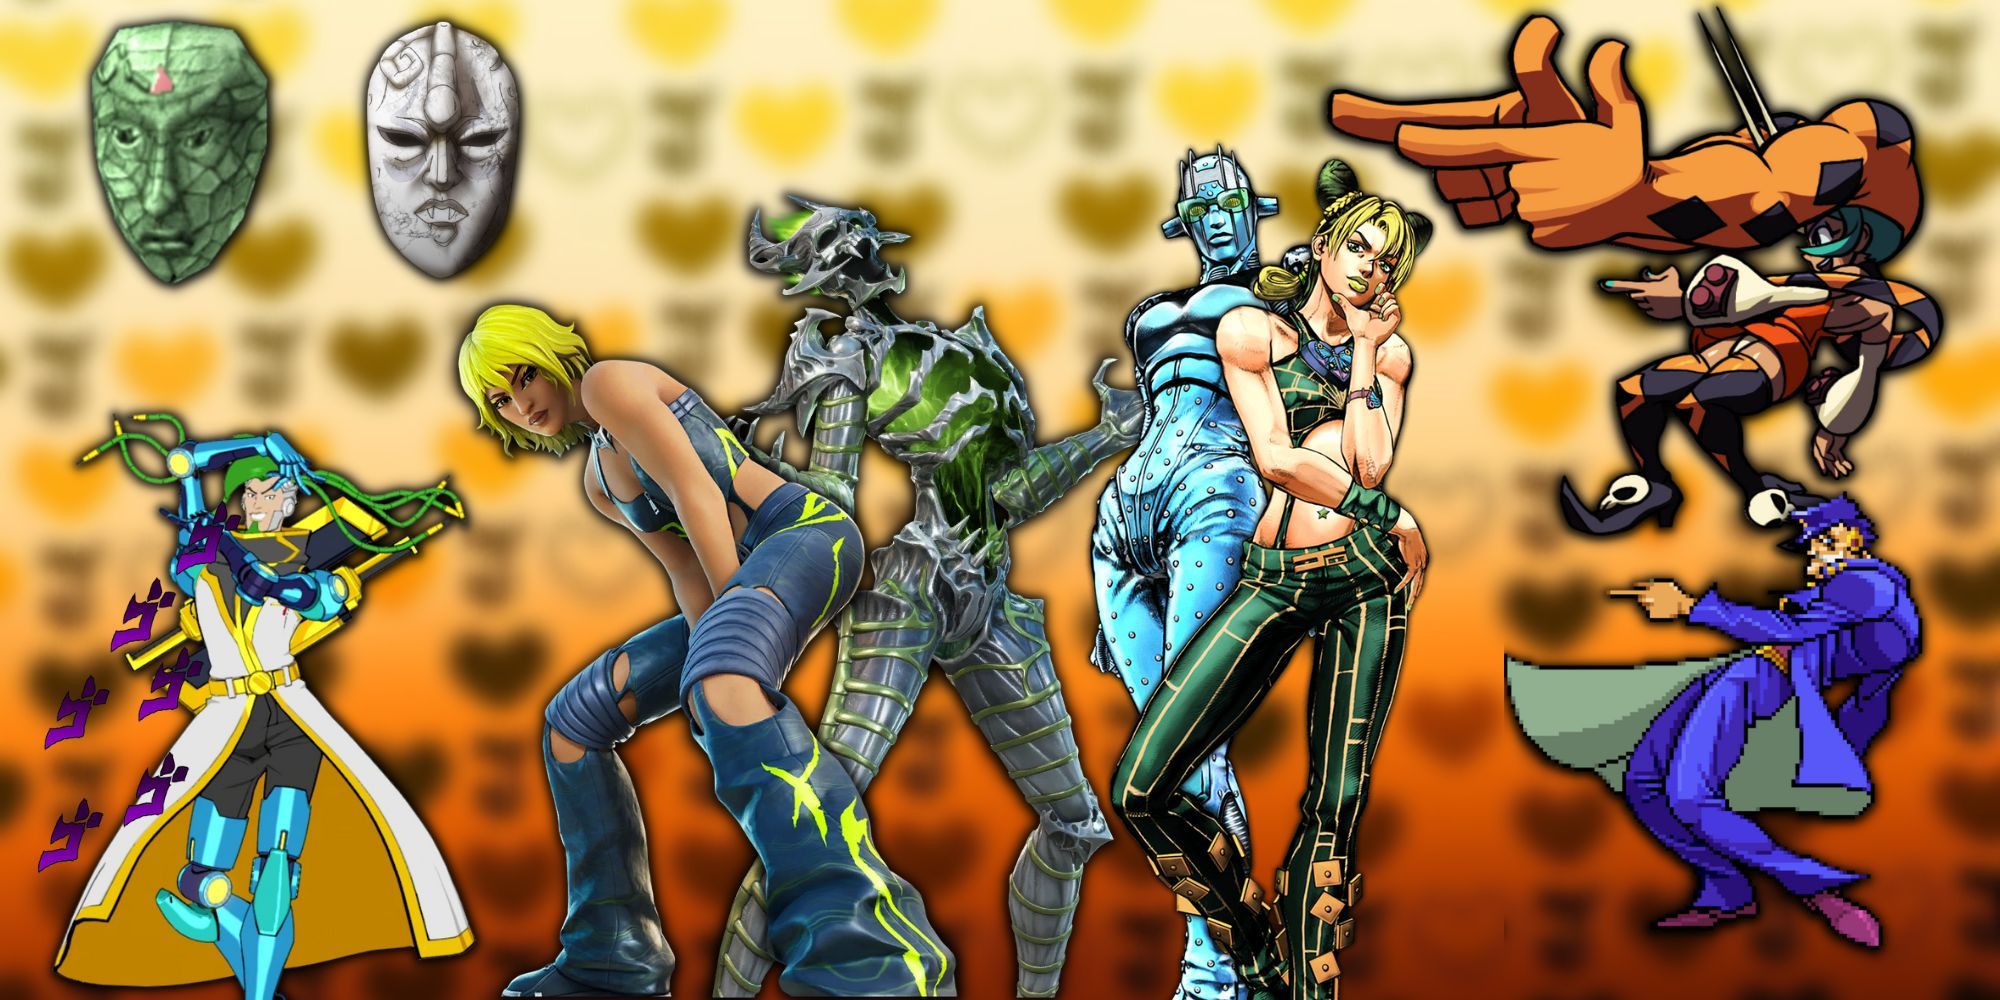 A collage of some prominent Jojo's Bizarre Adventure References from Video Games: The Stone Mask from Castlevania, Zanzo from Hi-Fi Rush, Hana and Kalerikas from Fortnite and Celebella from Skullgirls.